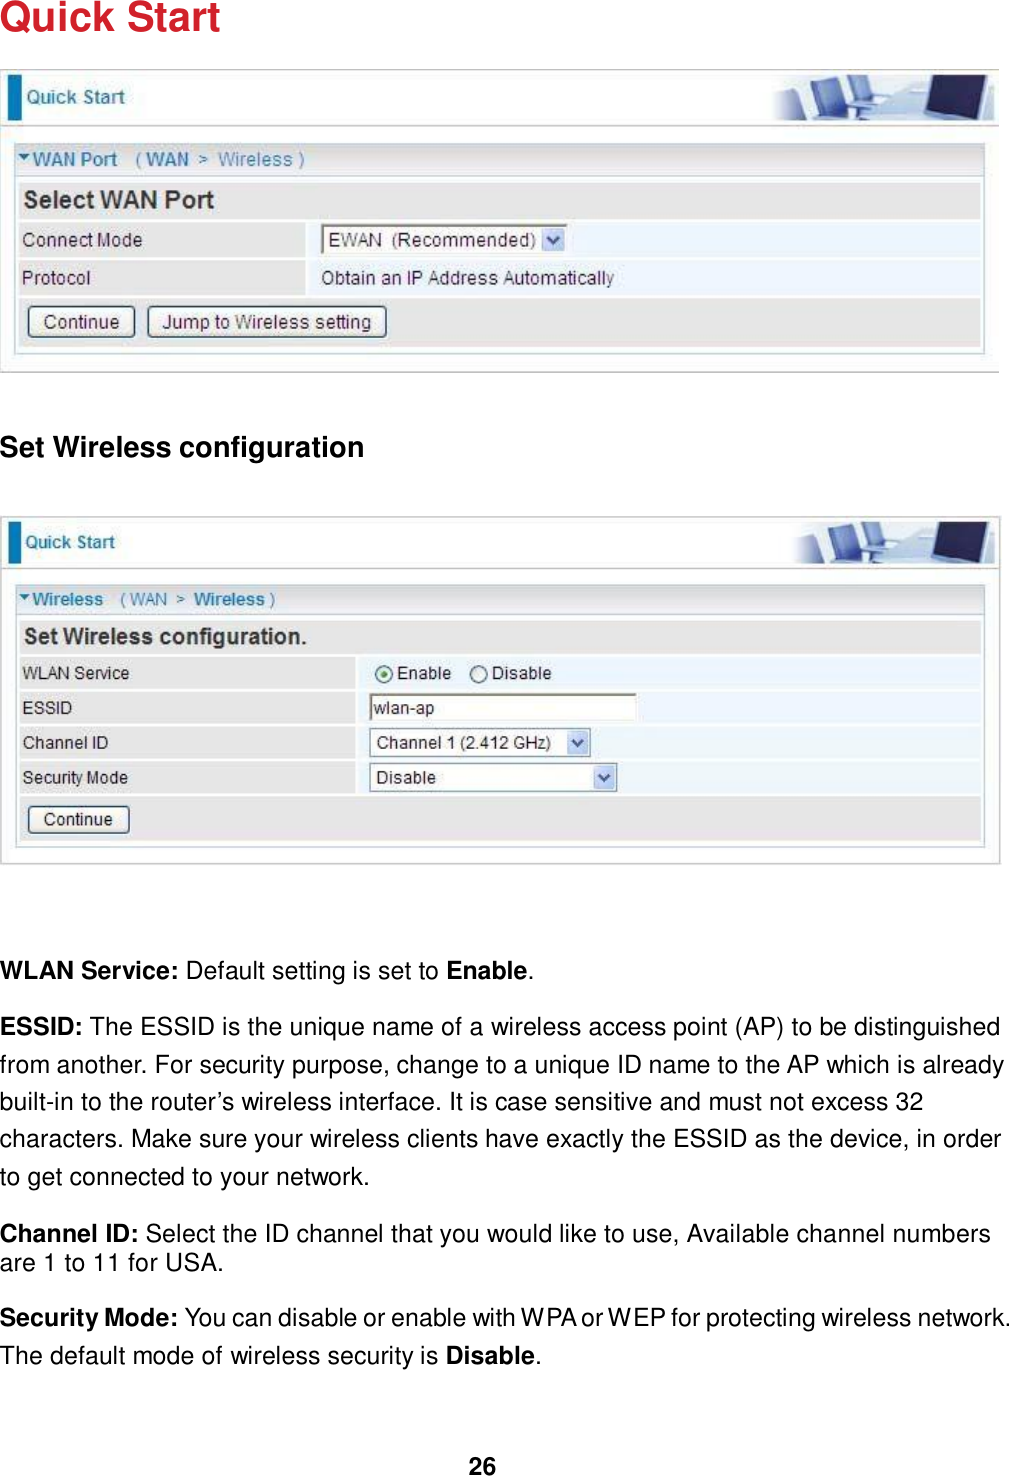 26  Quick Start      Set Wireless configuration        WLAN Service: Default setting is set to Enable.  ESSID: The ESSID is the unique name of a wireless access point (AP) to be distinguished from another. For security purpose, change to a unique ID name to the AP which is already built-in to the router’s wireless interface. It is case sensitive and must not excess 32 characters. Make sure your wireless clients have exactly the ESSID as the device, in order to get connected to your network.  Channel ID: Select the ID channel that you would like to use, Available channel numbers are 1 to 11 for USA.   Security Mode: You can disable or enable with WPA or WEP for protecting wireless network. The default mode of wireless security is Disable. 